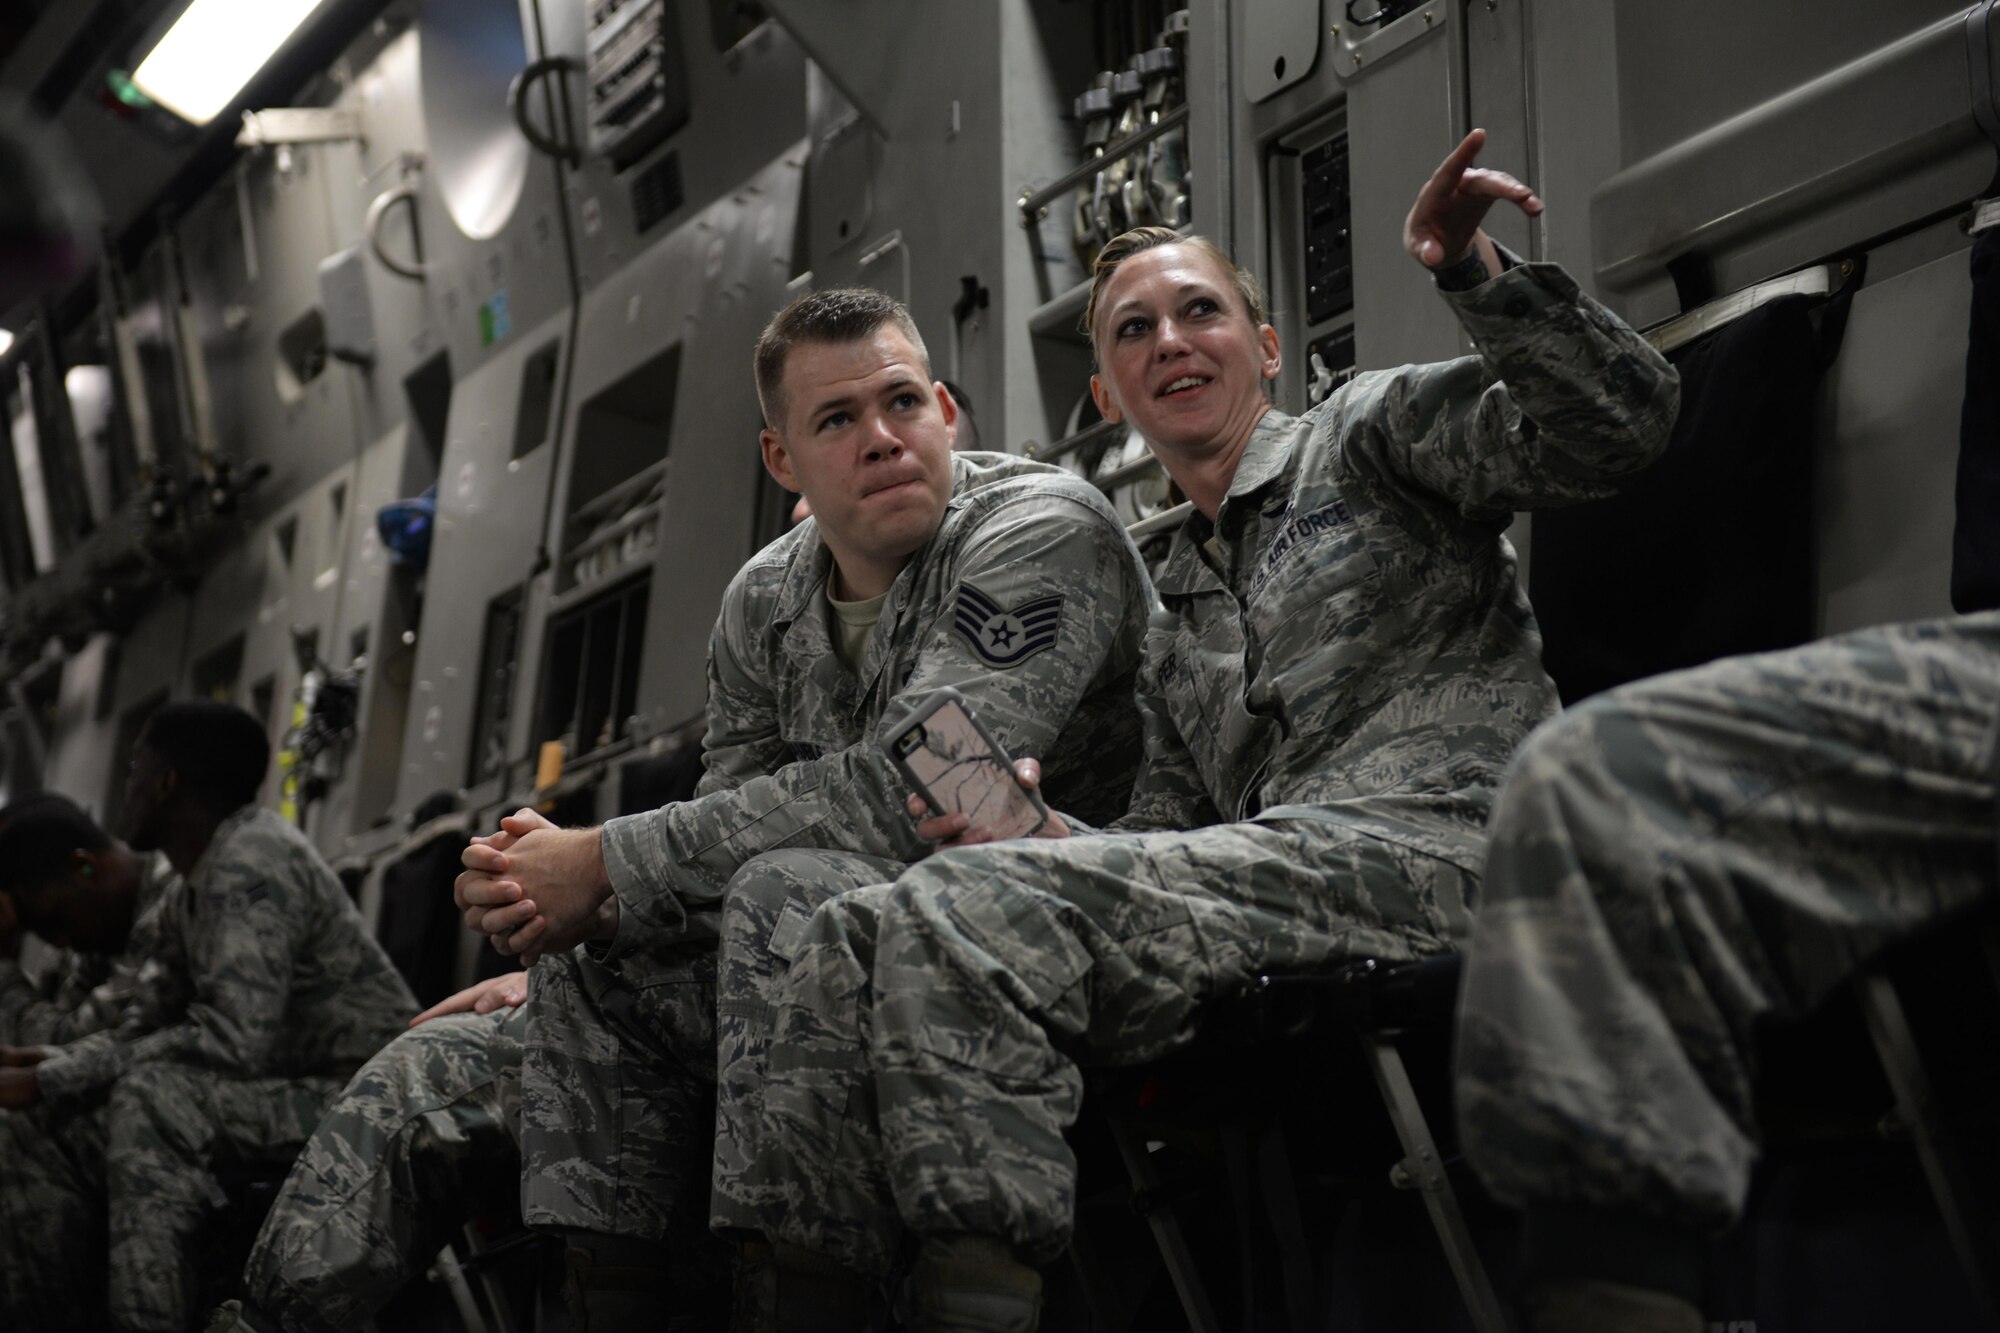 Staff Sgt. Craig Schauble, 334th Training Squadron air traffic control instructor, and Tech. Sgt. Jennifer Harper, 81st Training Wing equal opportunity specialist, share a conversation during an incentive flight Aug. 4, 2016, at Keesler Air Force Base, Miss. The incentive flight was part of a weeklong hurricane exercise to prepare Keesler for the current hurricane season. (Air Force Photo by Airman 1st Class Travis Beihl/Released)